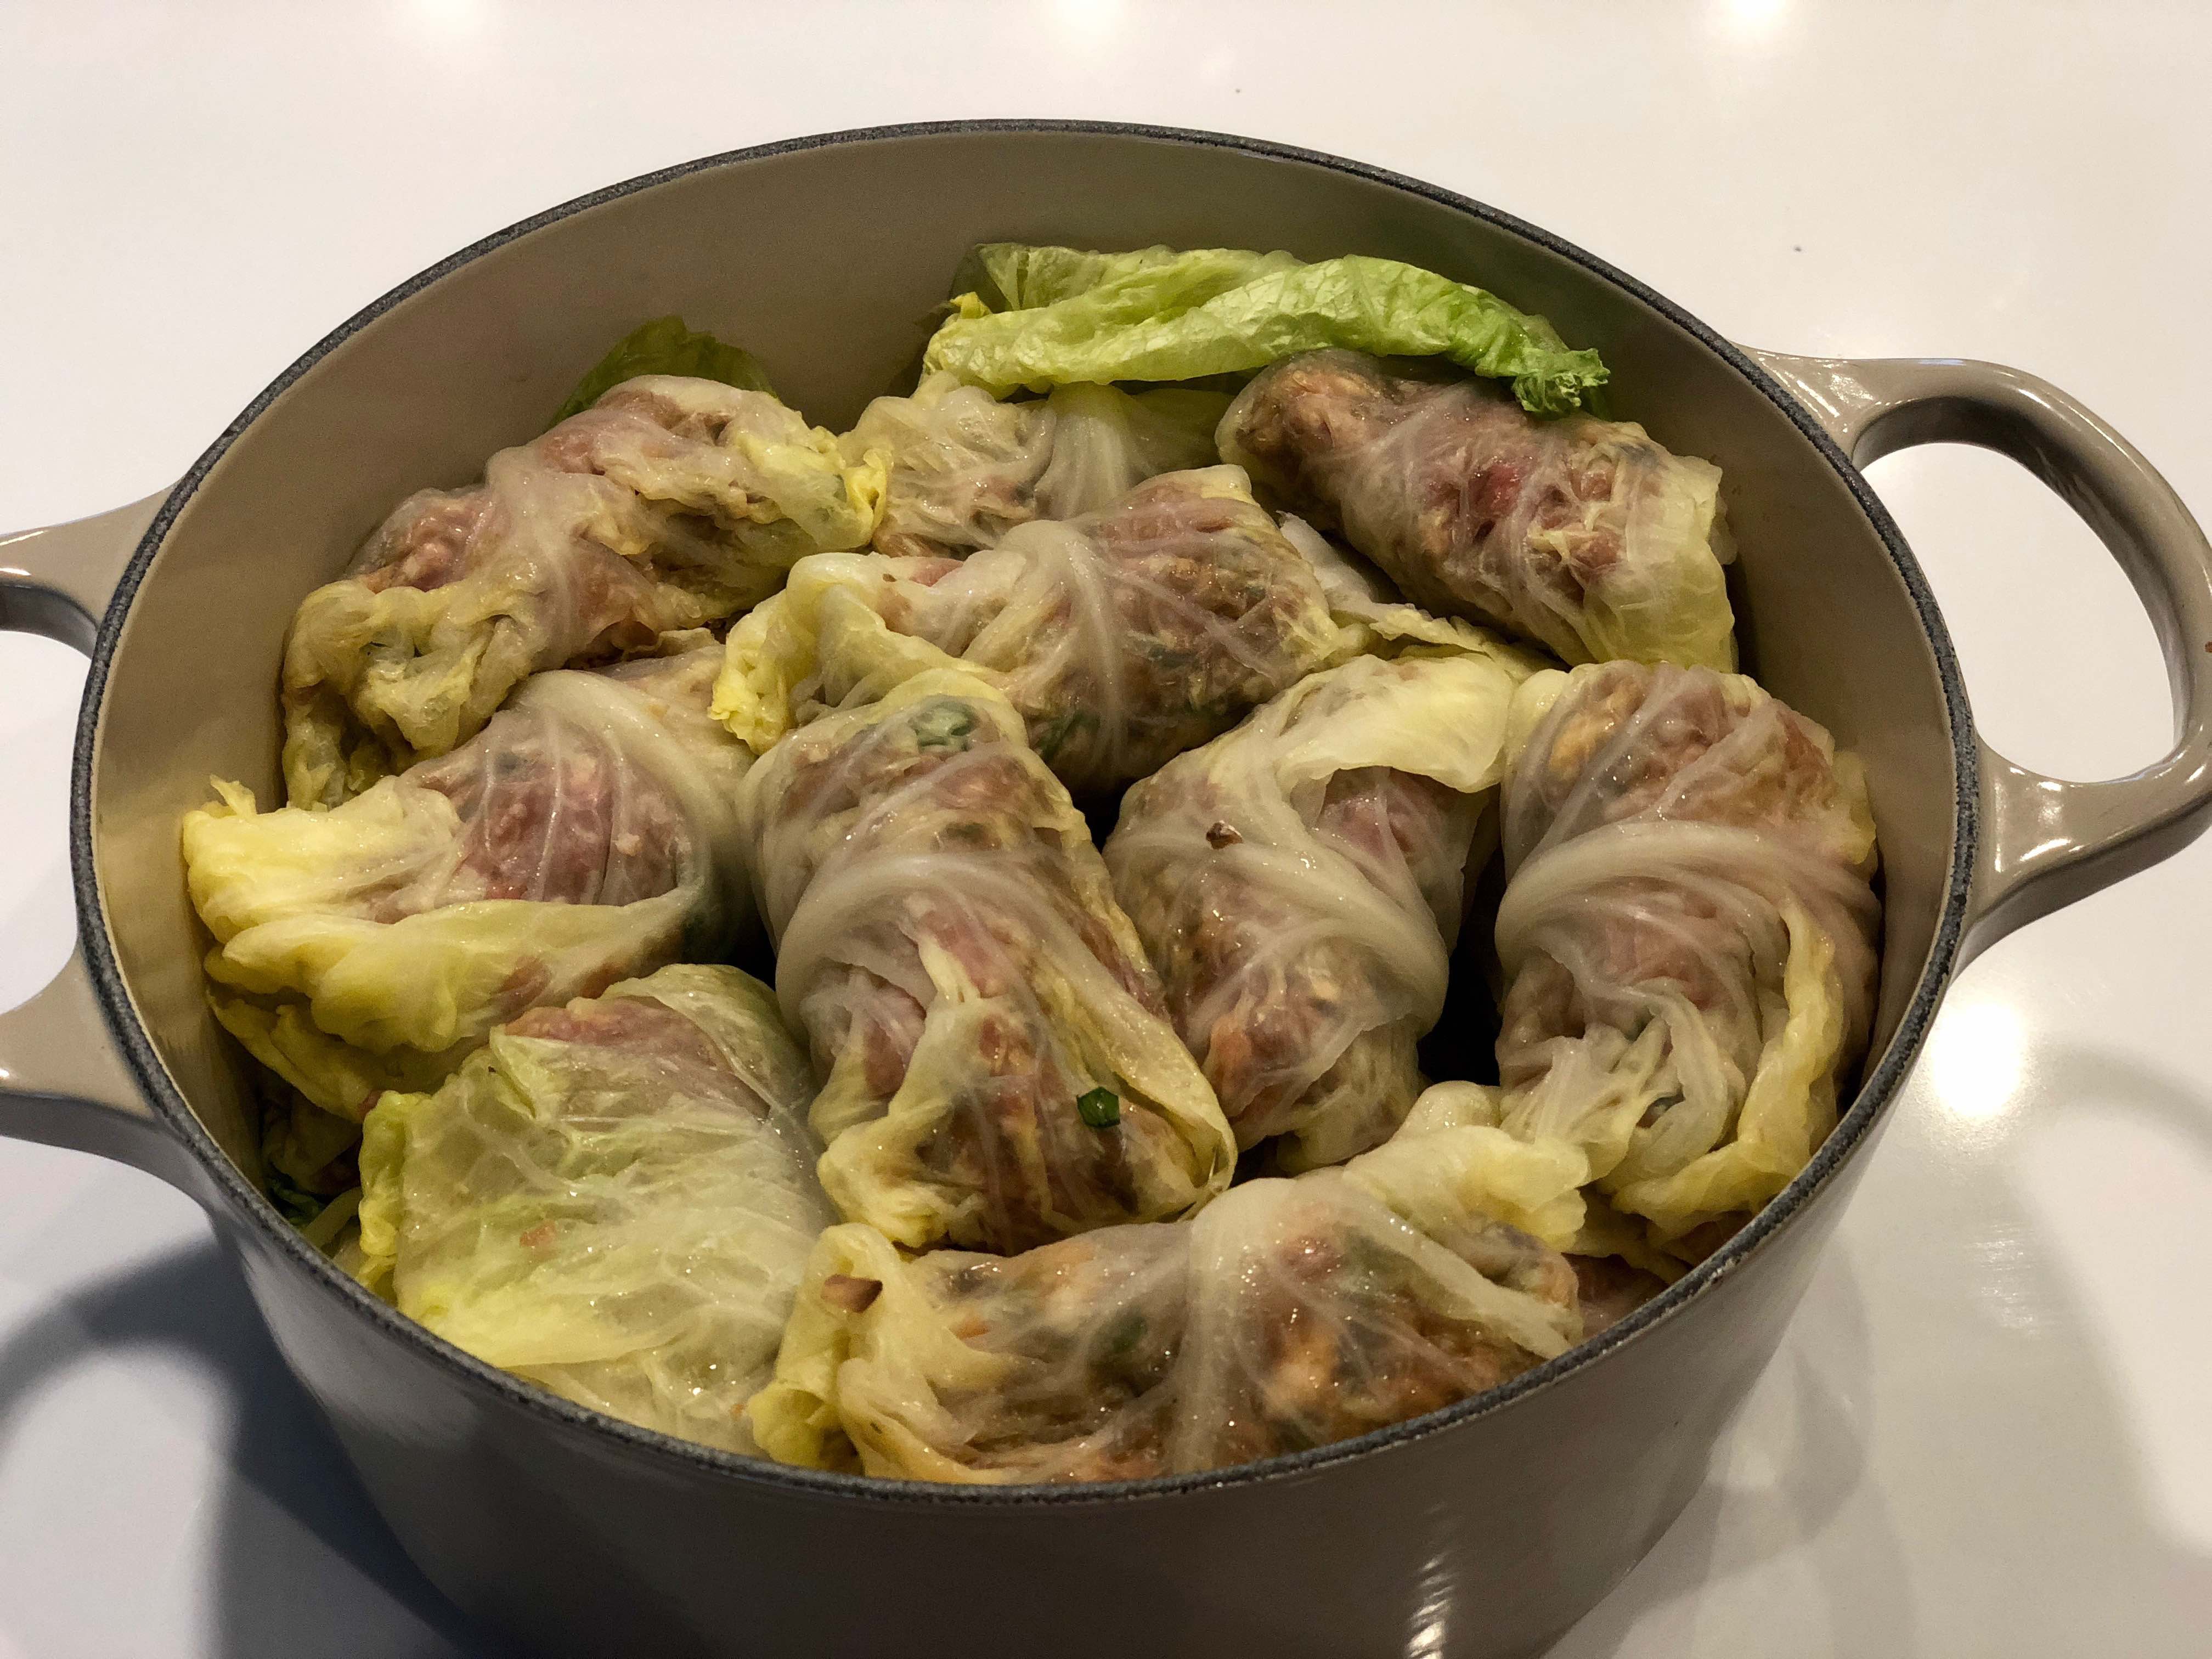 Stuffed Cabbage Rolls in Sweet and Sour Sauce